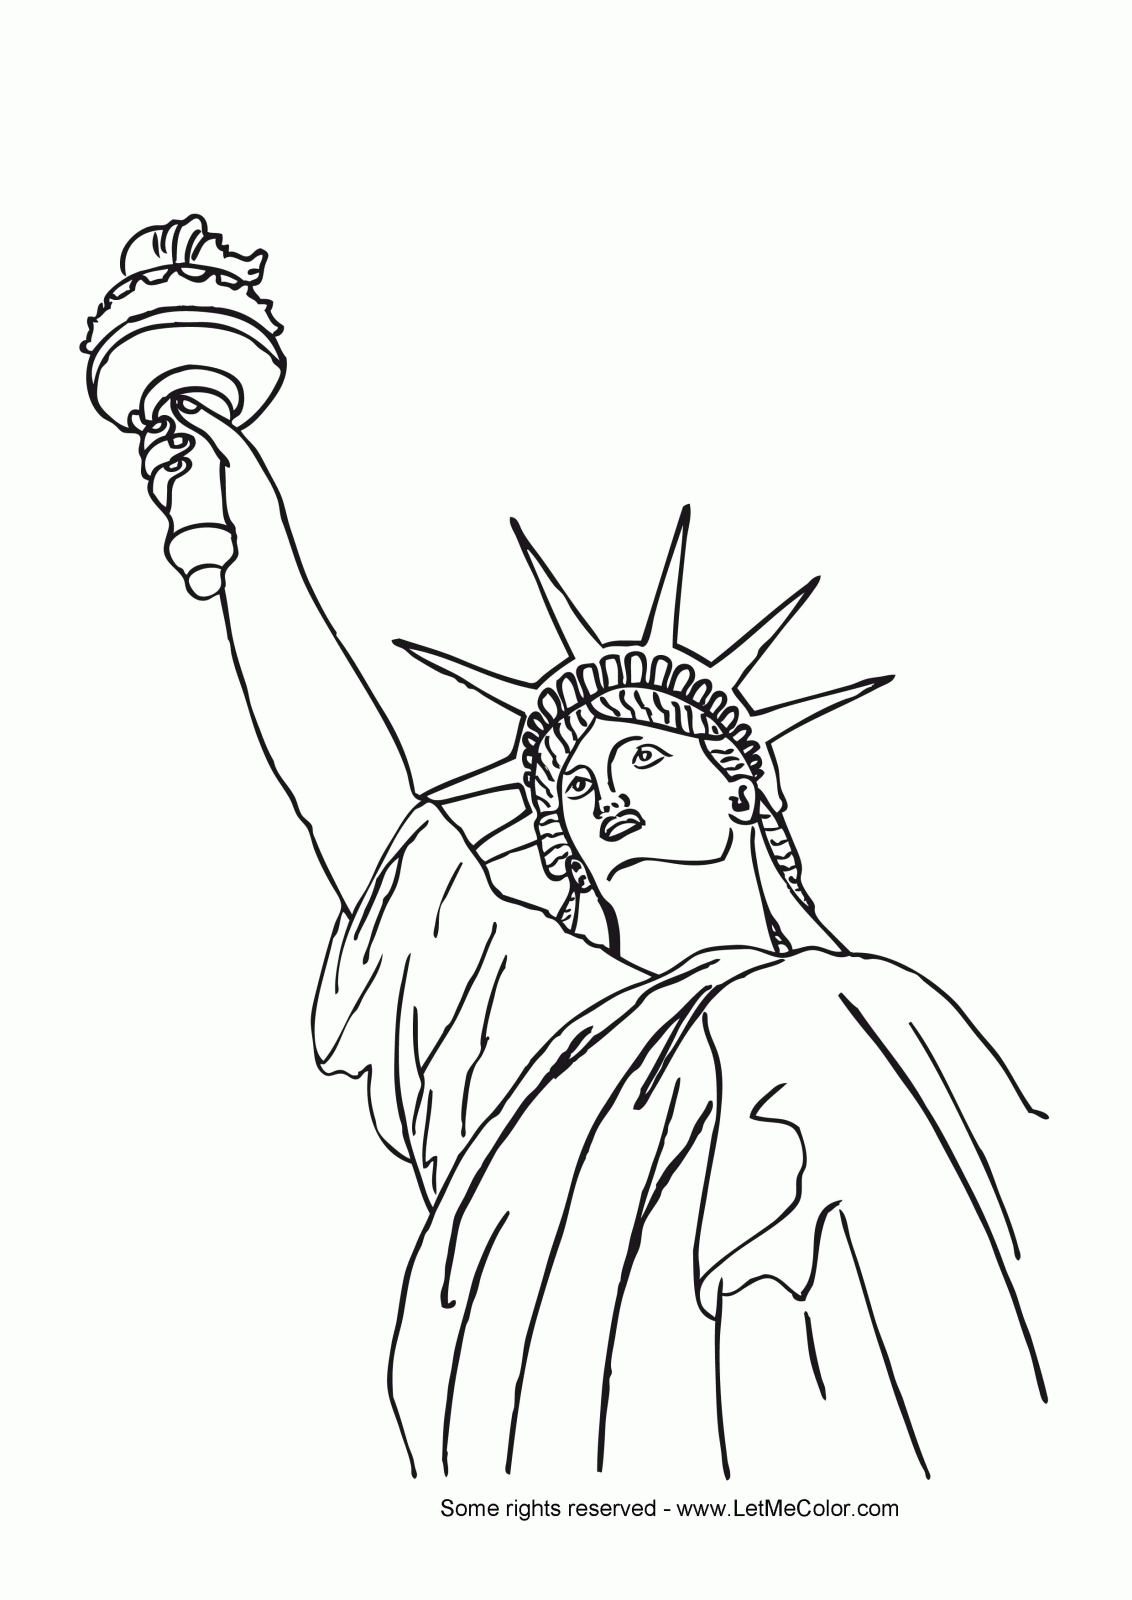 statue of liberty coloring page statue of liberty coloring page crayolacom statue of page coloring liberty 